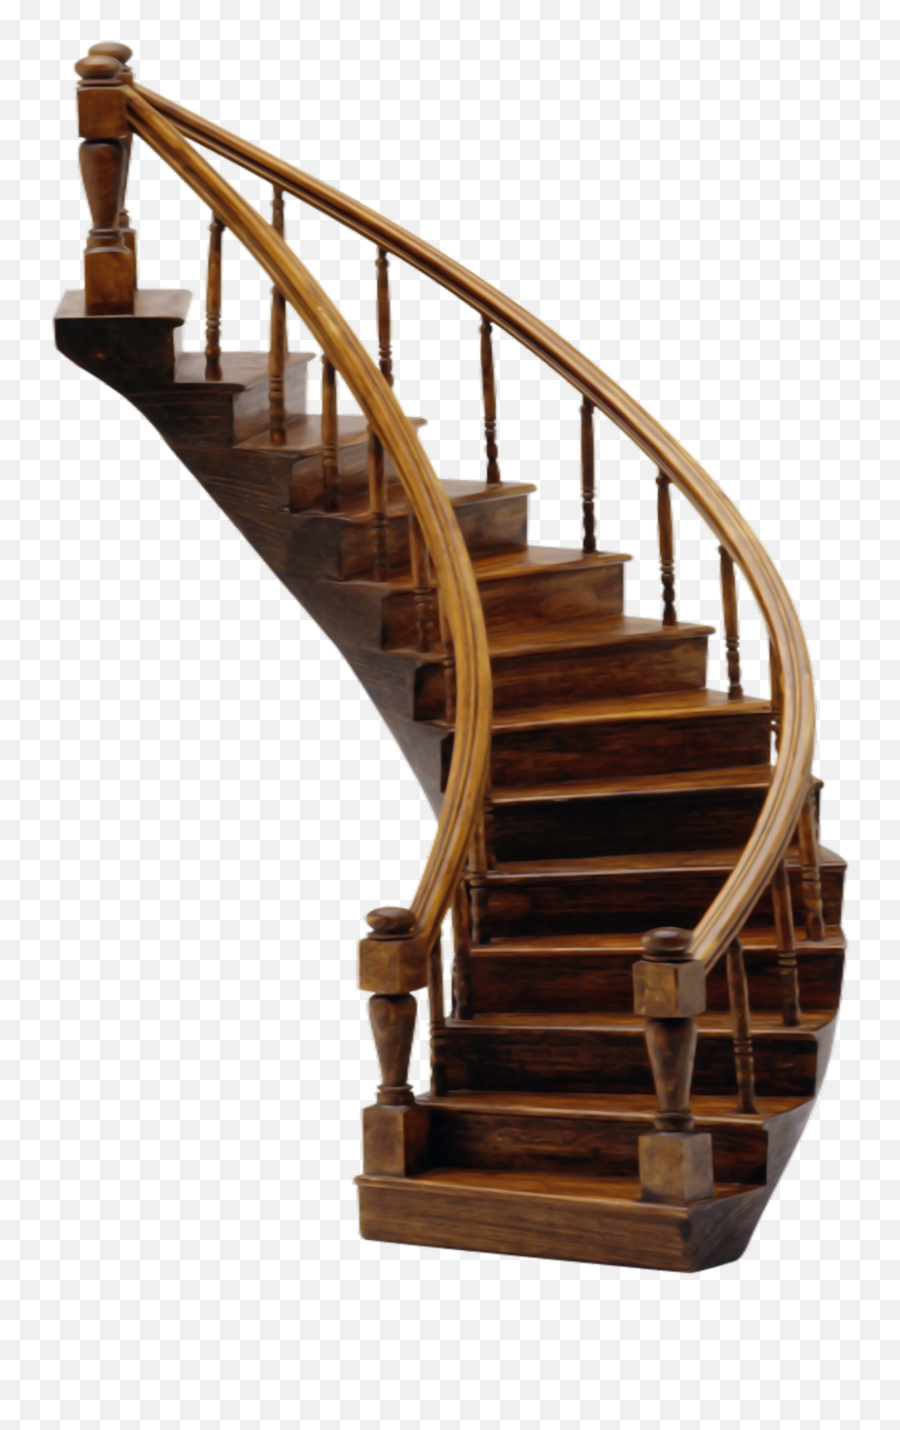 Staircase Stairs Wood Curved Sticker - Wooden Stairs Transparent Background Emoji,Stairs Emoji